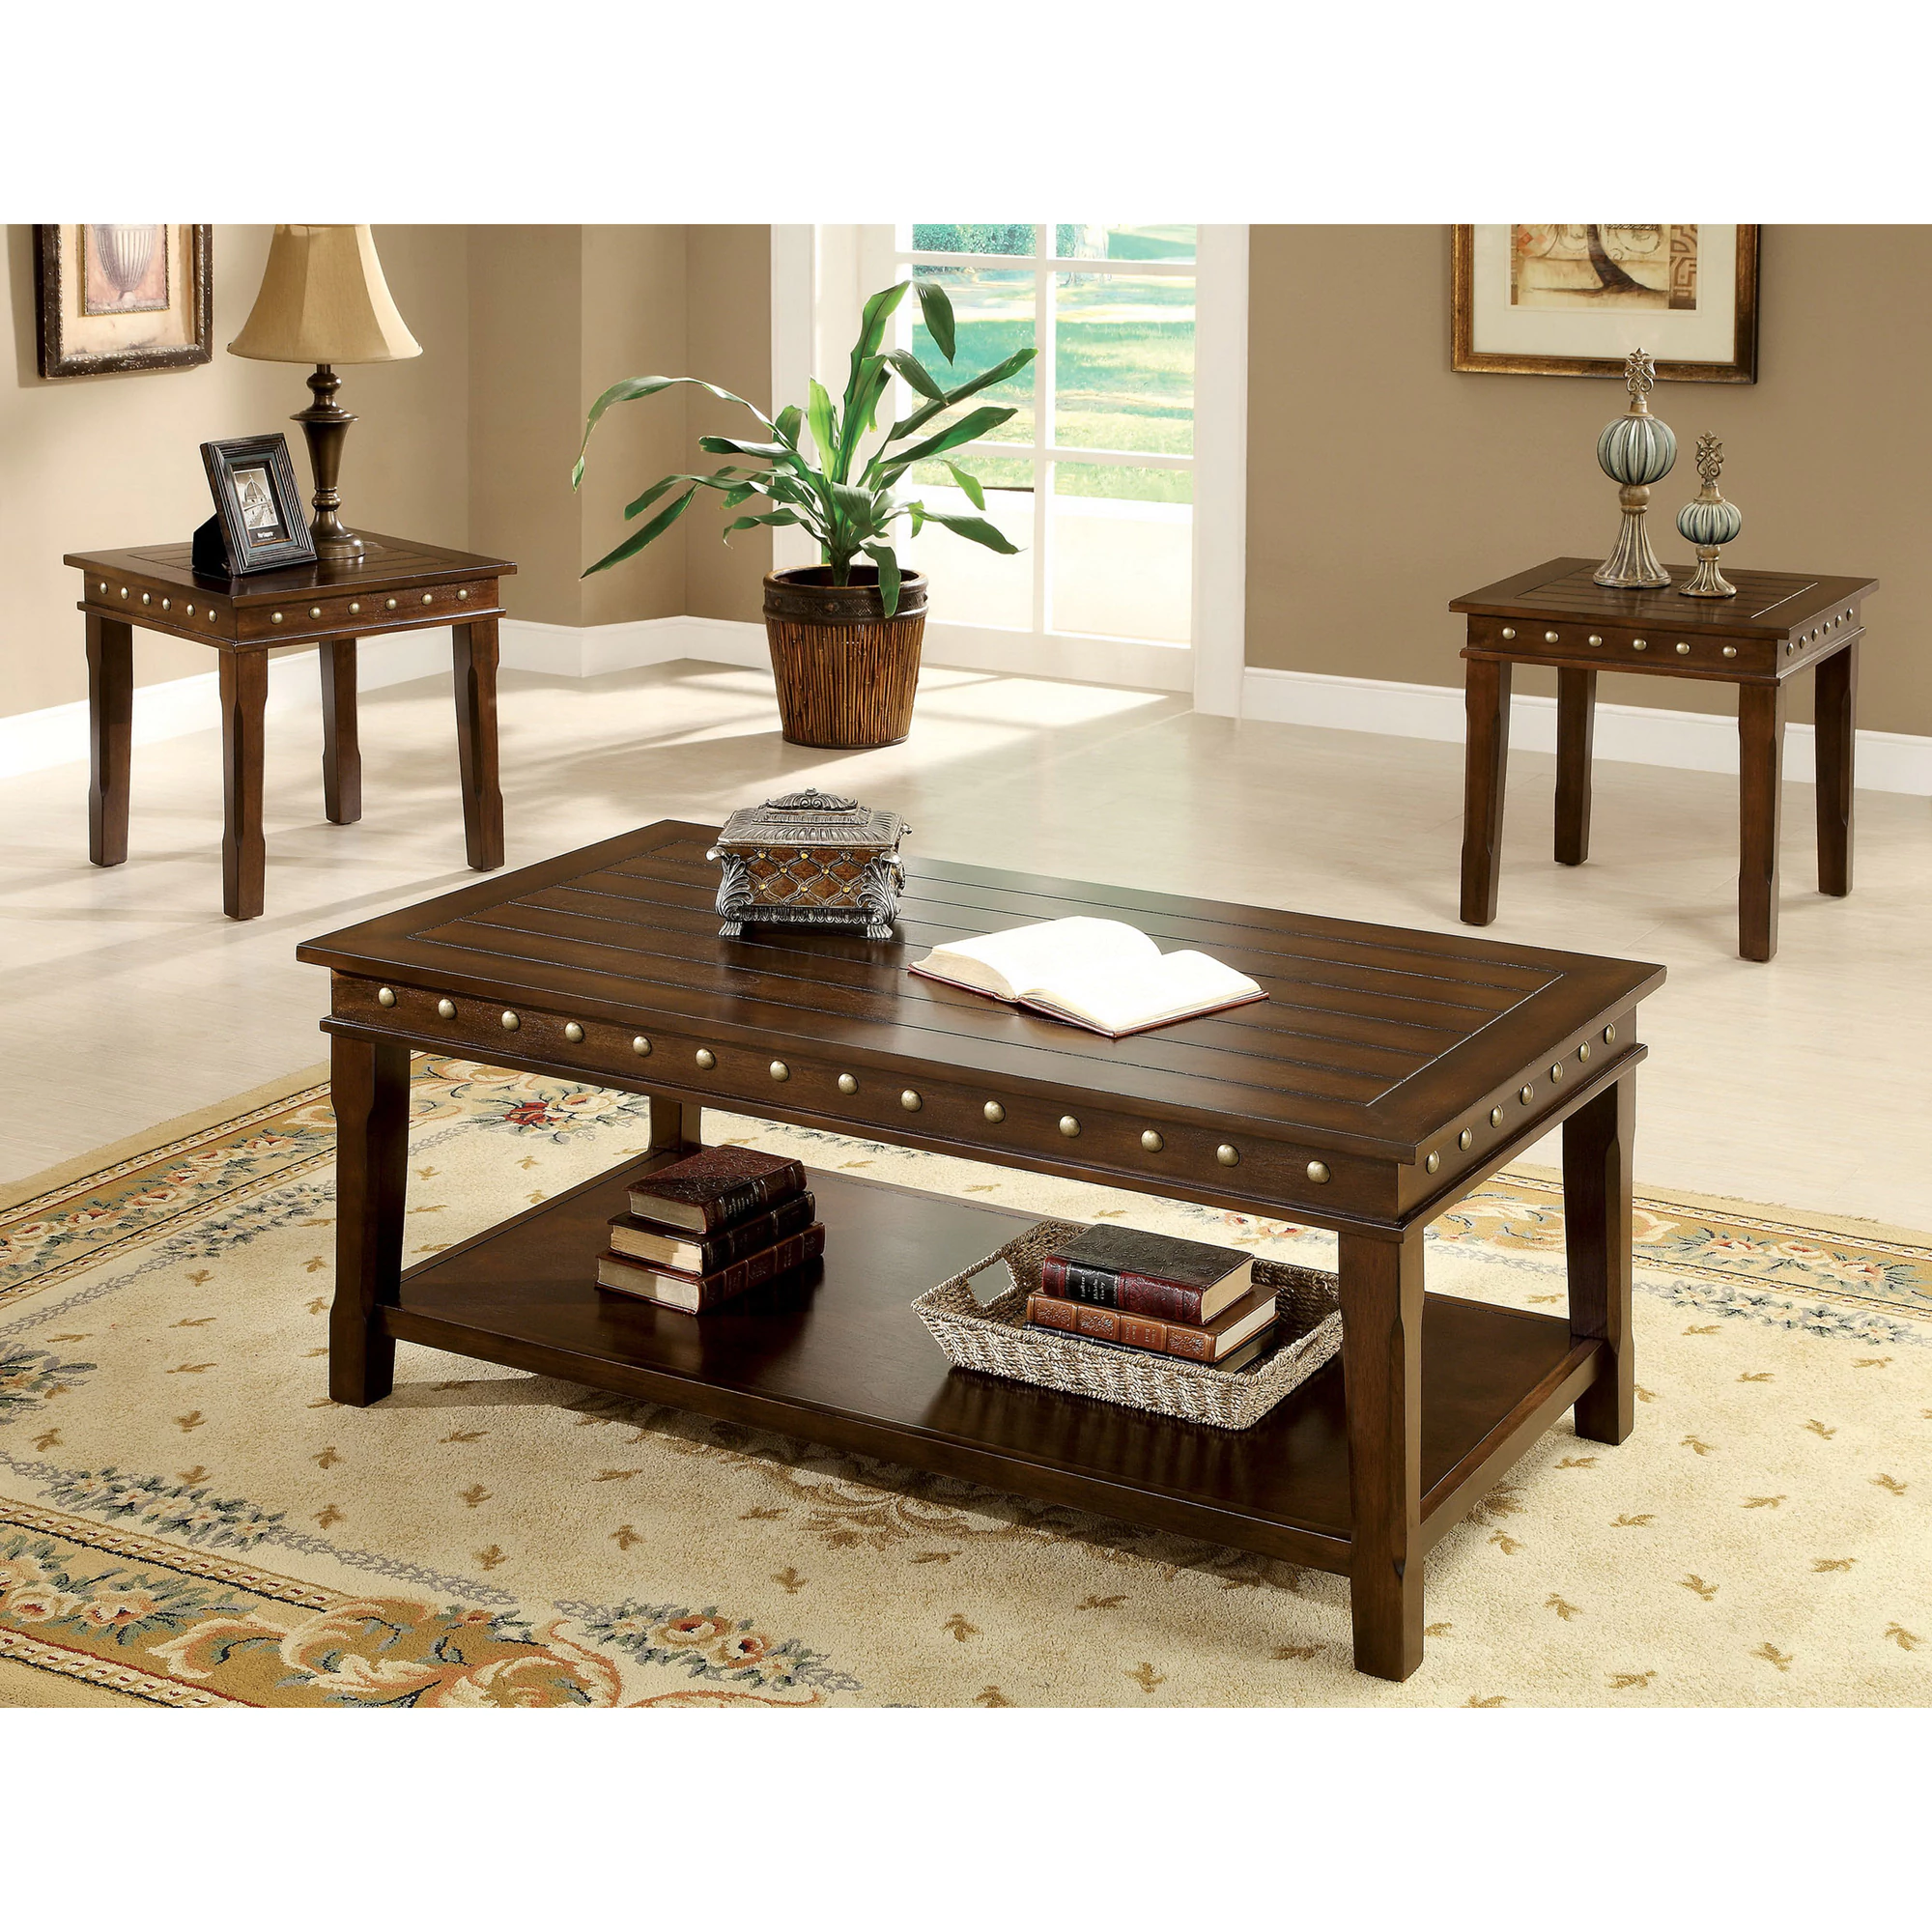 furniture america theresa piece rustic nailhead trim coffee end table set accent with nailheads free shipping today target makeup vanity gold side lamps antique round claw feet